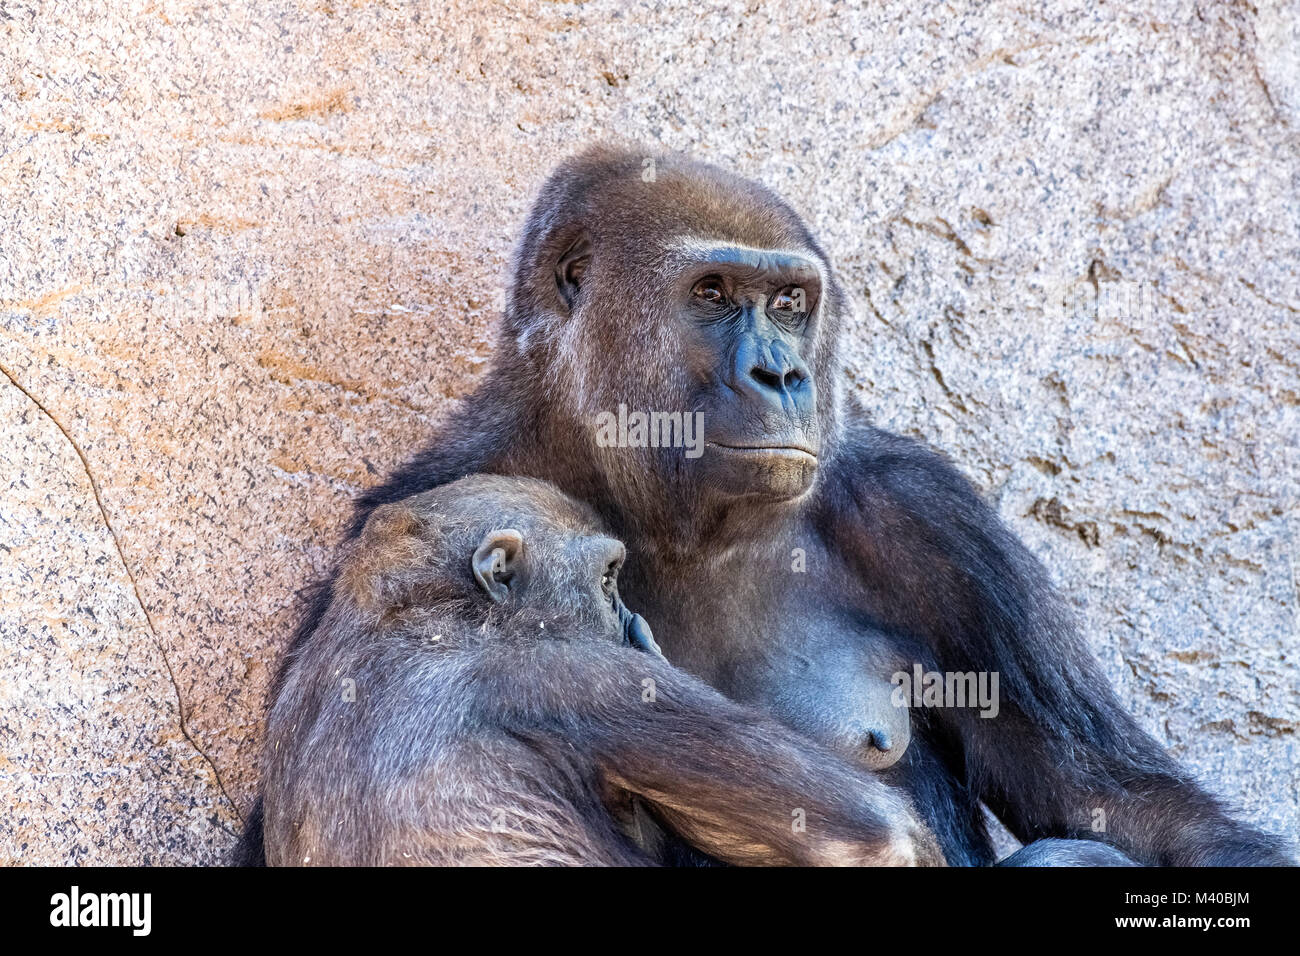 A female silverback gorilla with her young offspring shows the bond between mother and infant. Stock Photo